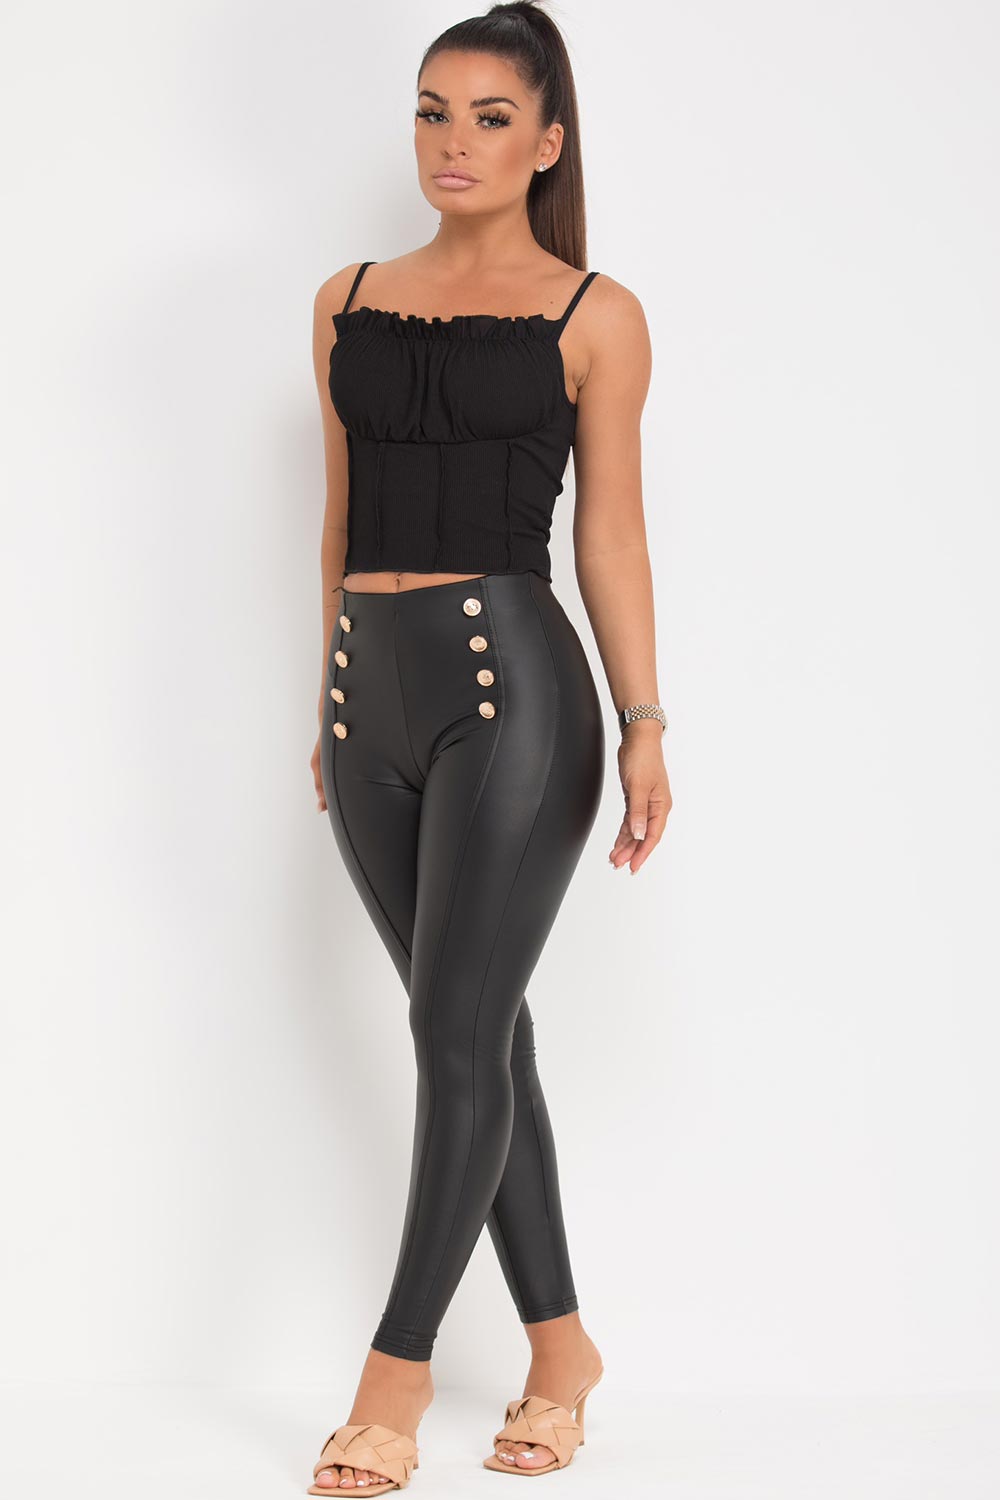 Black Croc Faux Leather High Waisted Leggings –